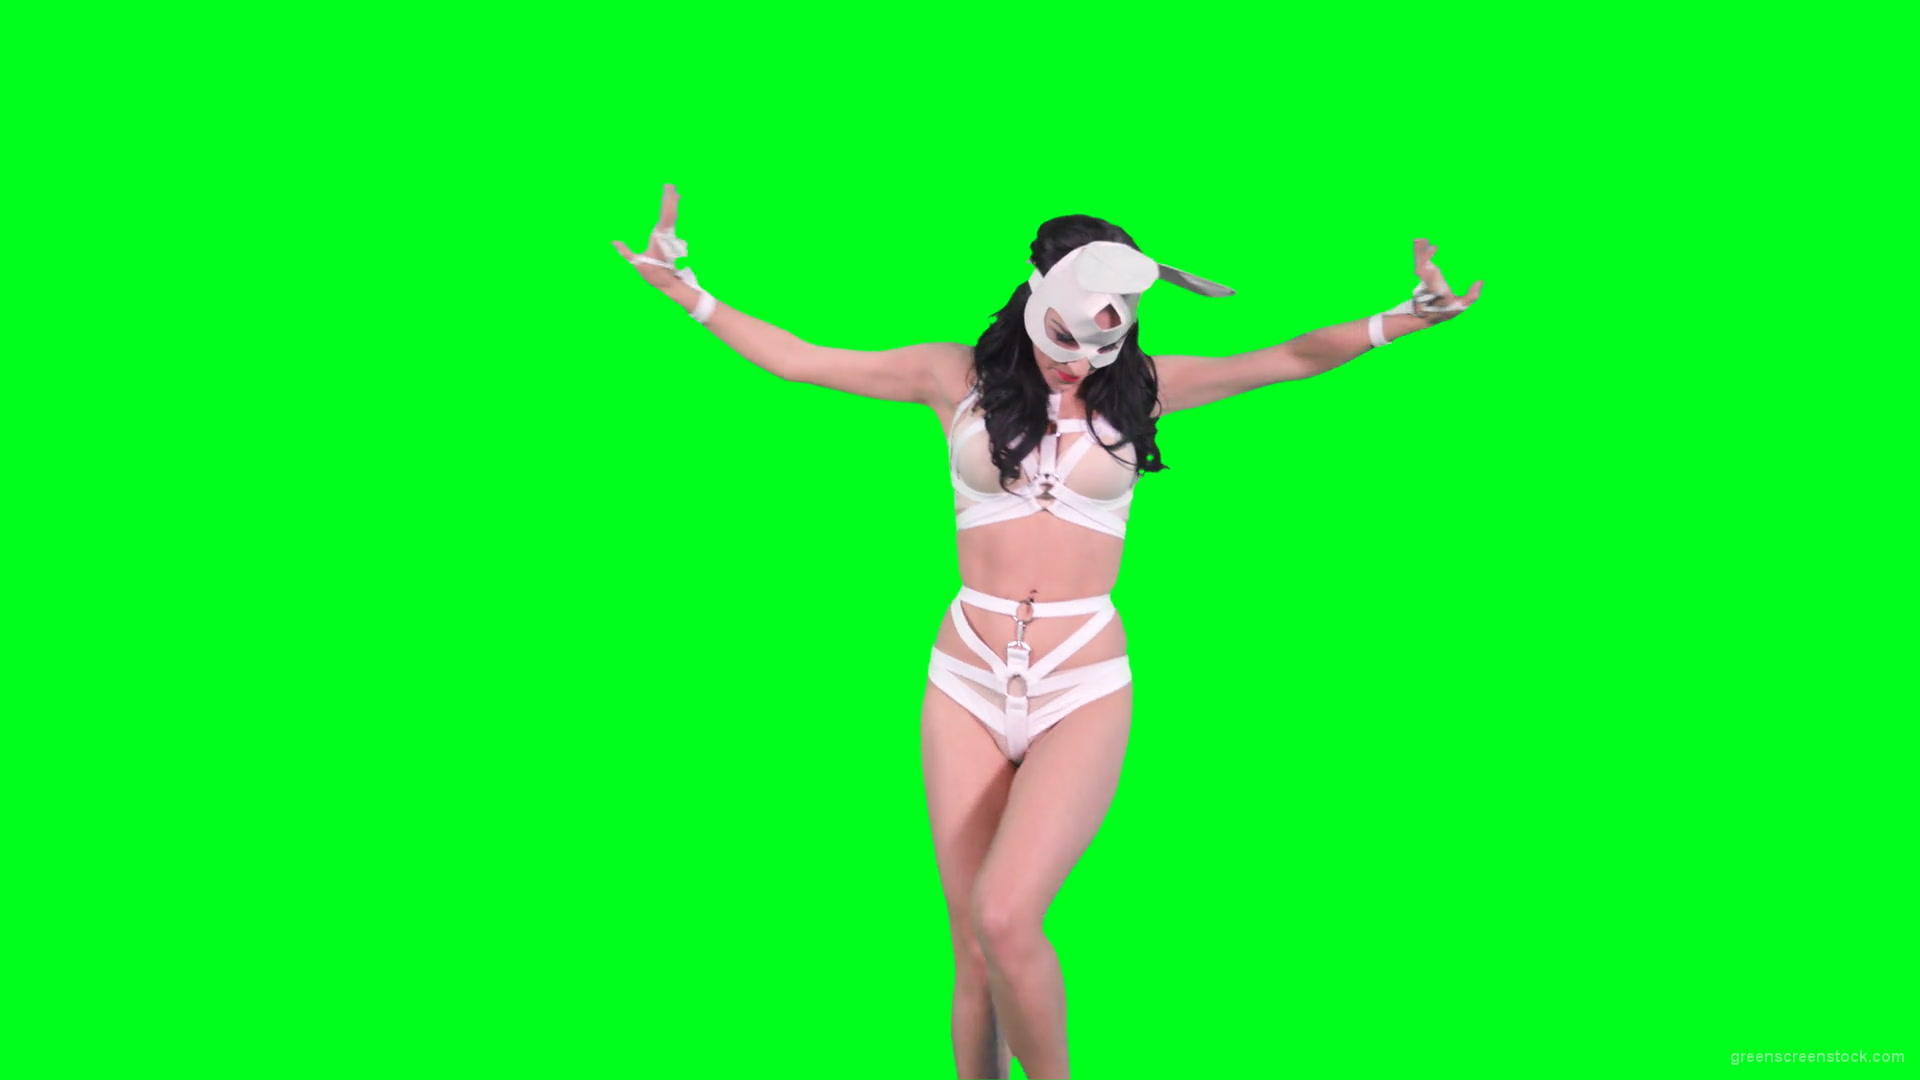 Go-go-Dancer-in-White-Rabbit-EDM-fetish-costume-making-sexy-moves-on-green-screen-4K-video-footage-1920_005 Green Screen Stock